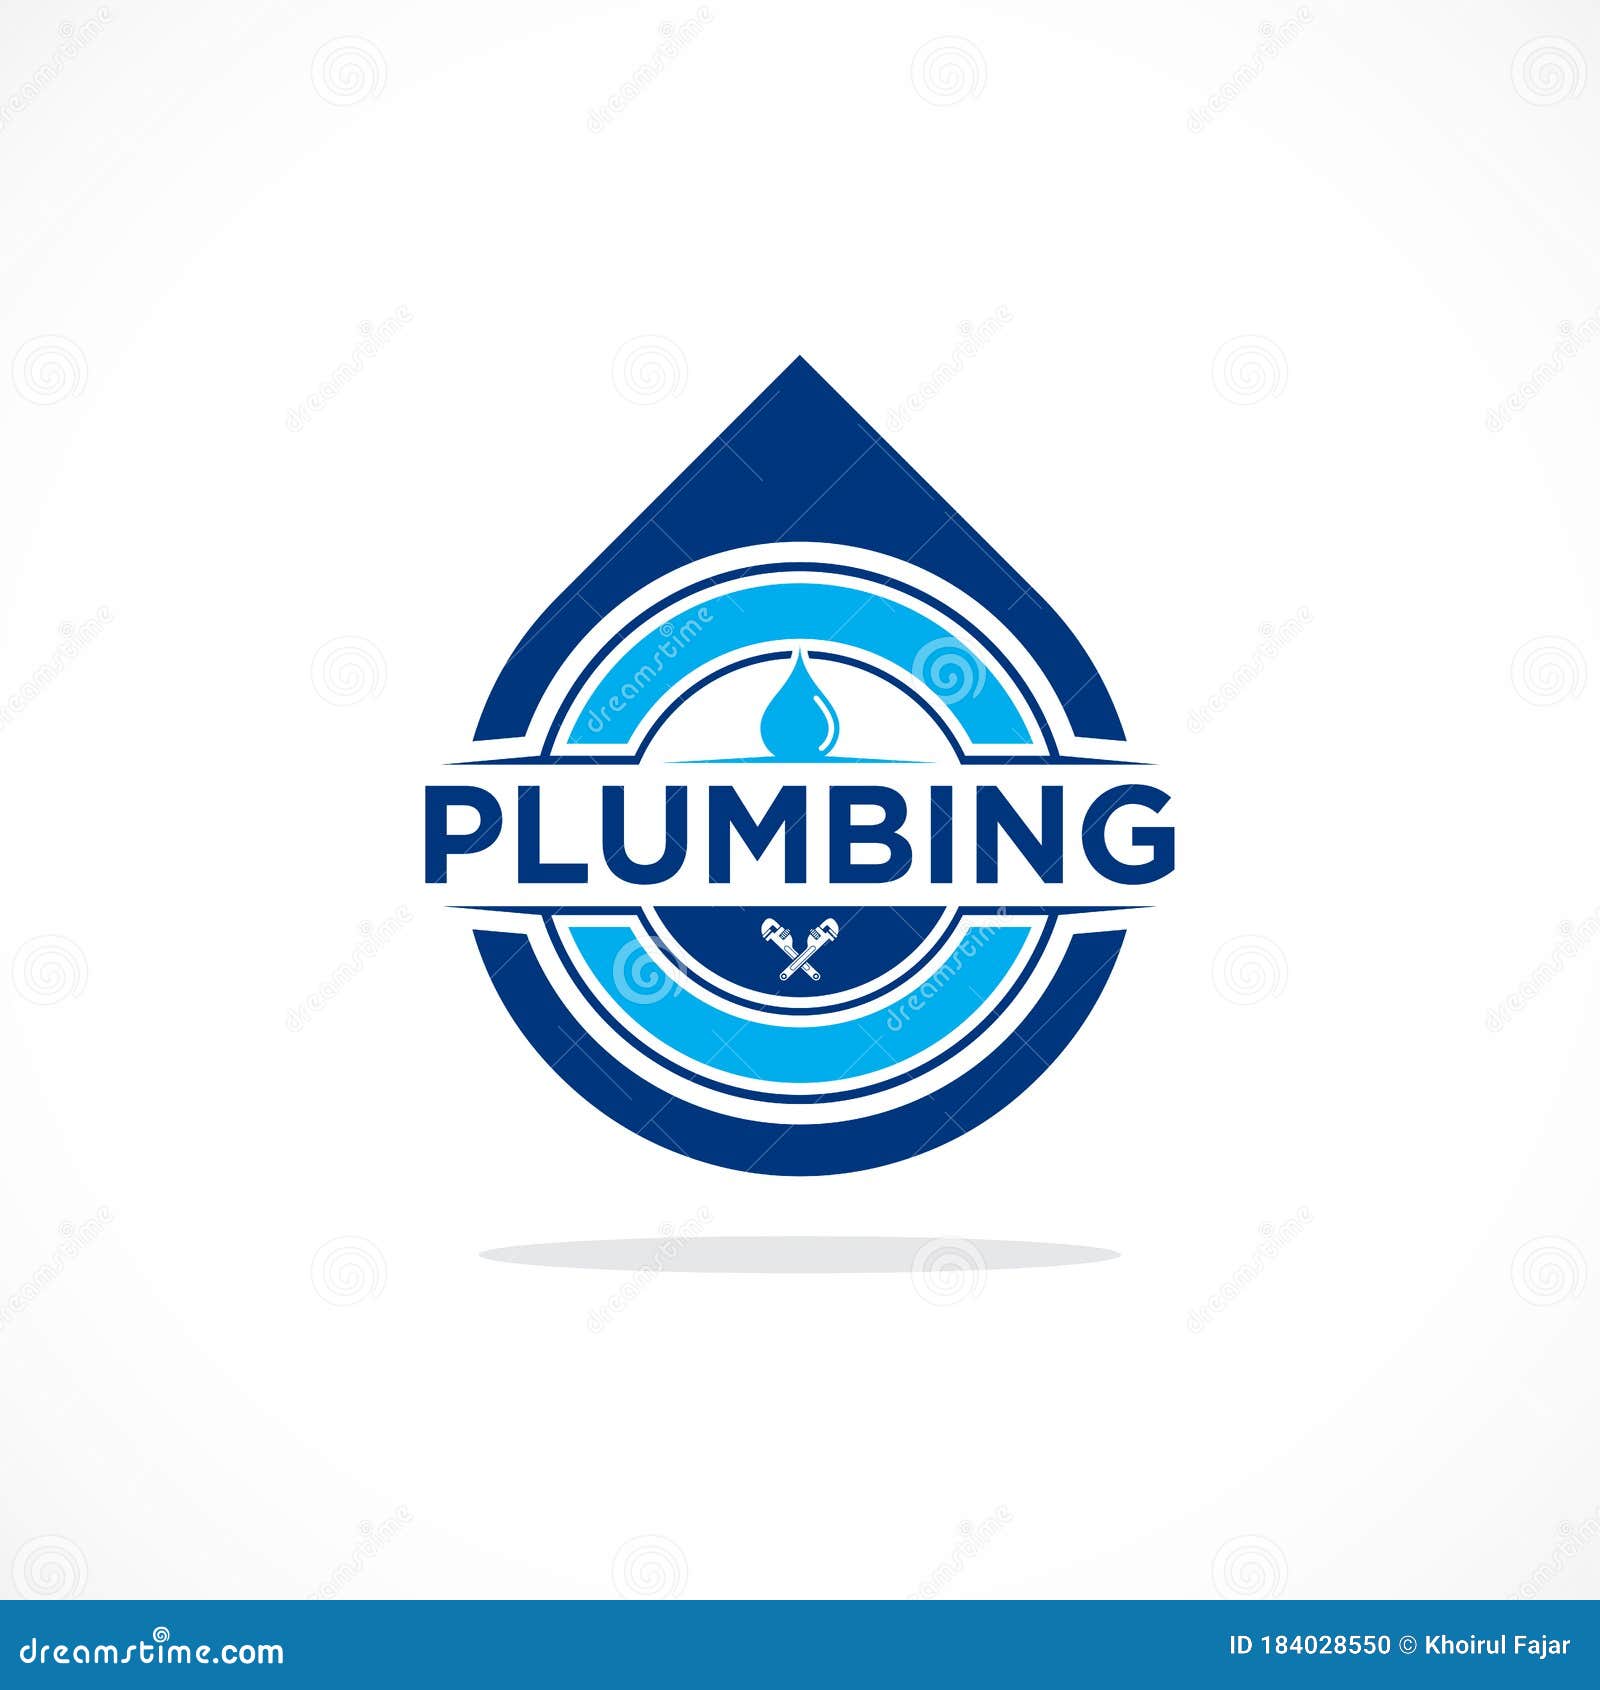 Plumbing Logo Template With Retro Or Vintage Style, Vector Illustration ...